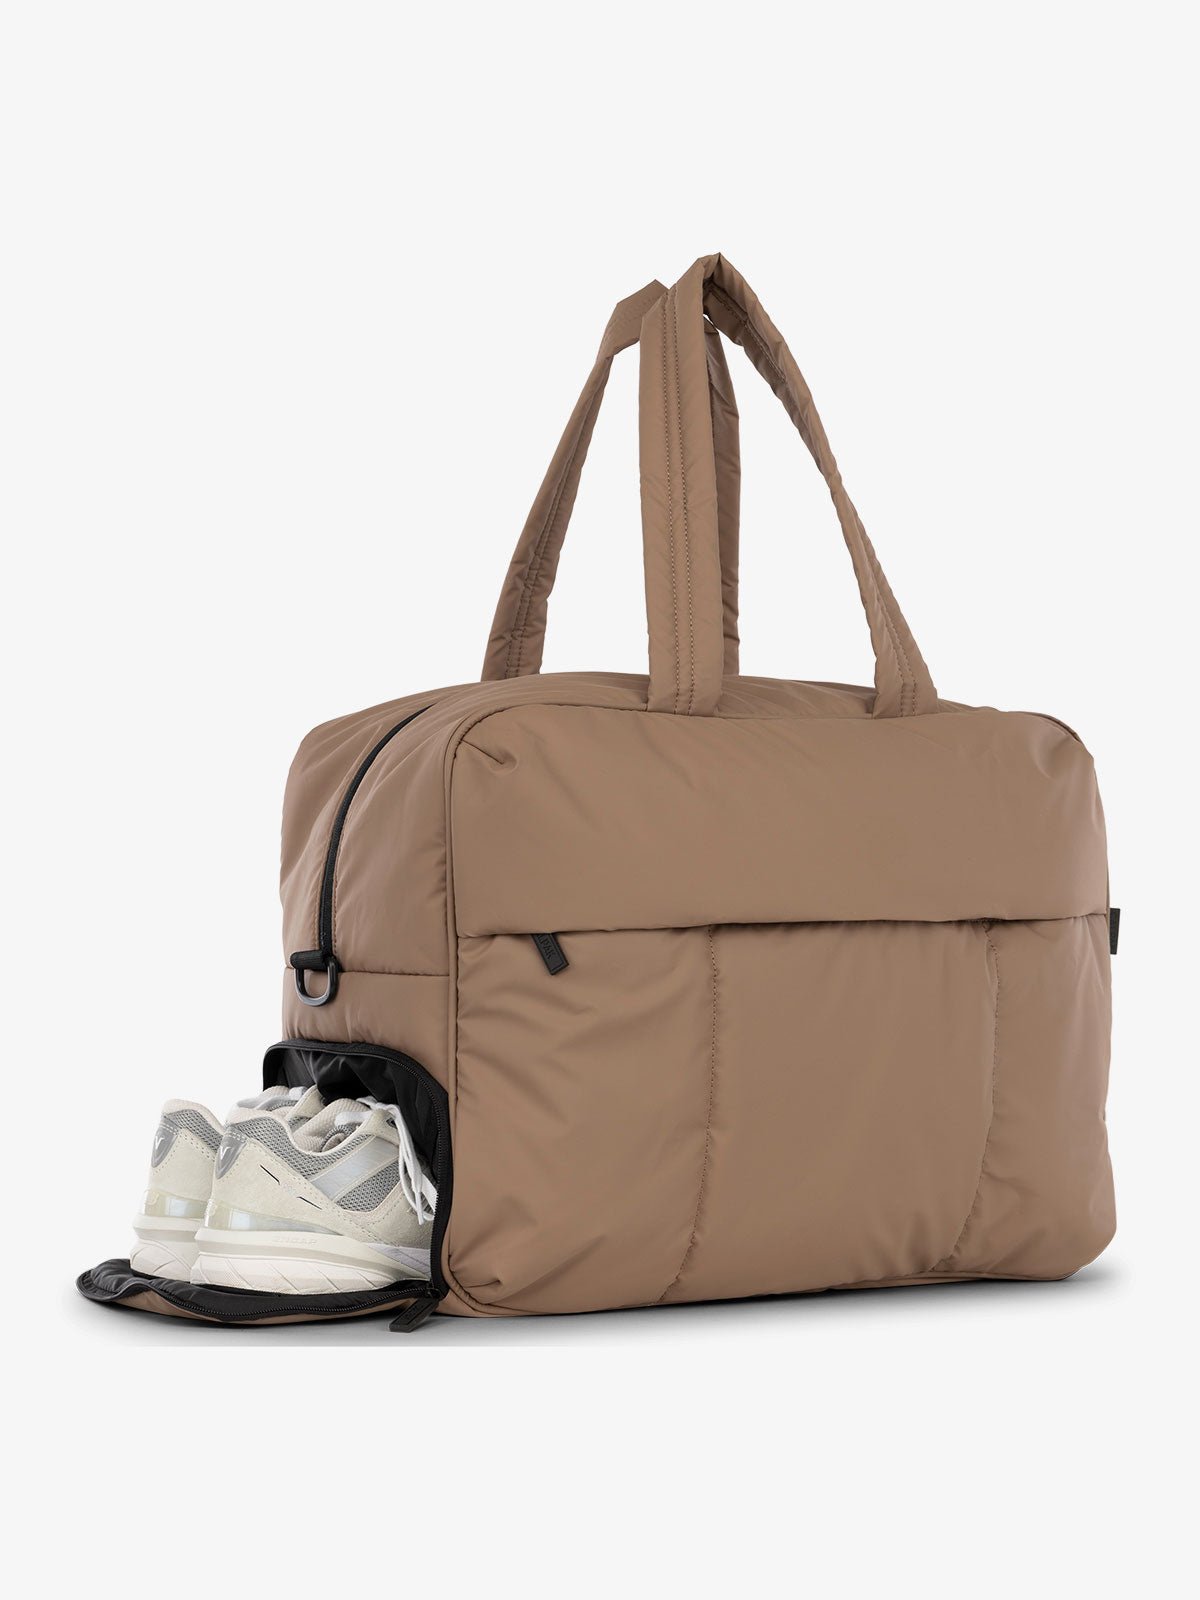 CALPAK Luka large duffel bag with side shoe compartment and dual handles in chocolate